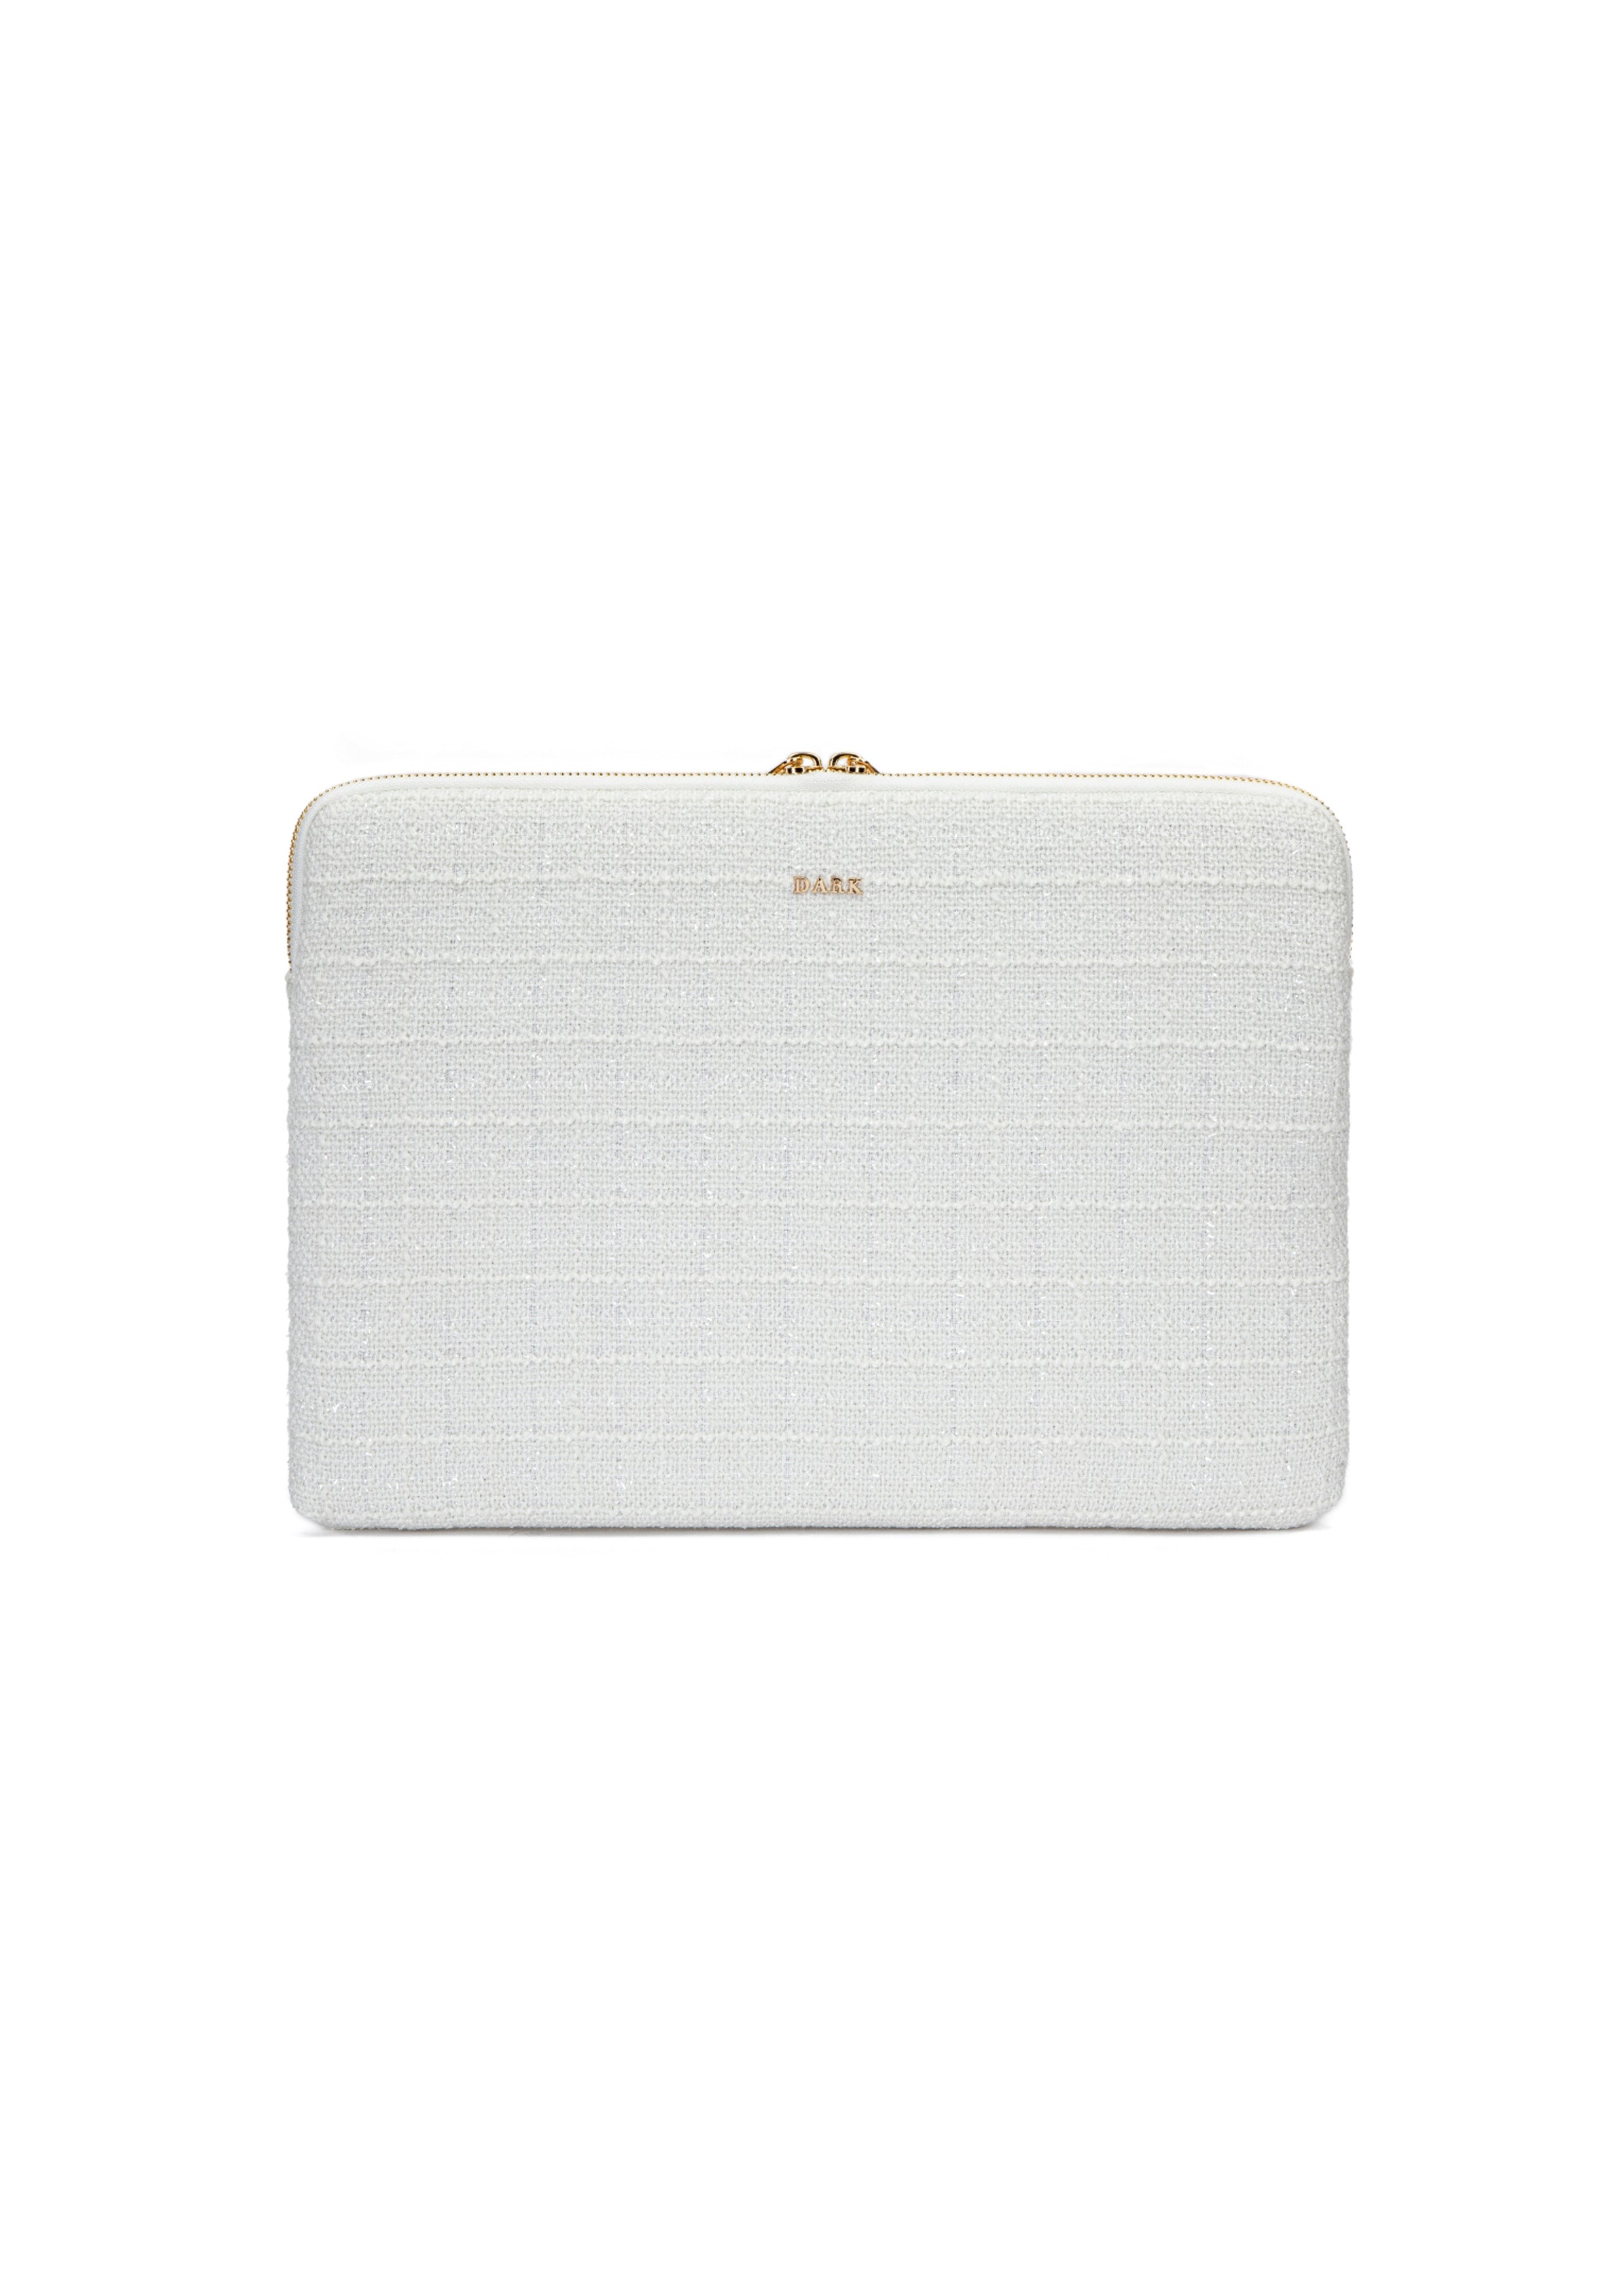 Tweed Mac Cover Off White